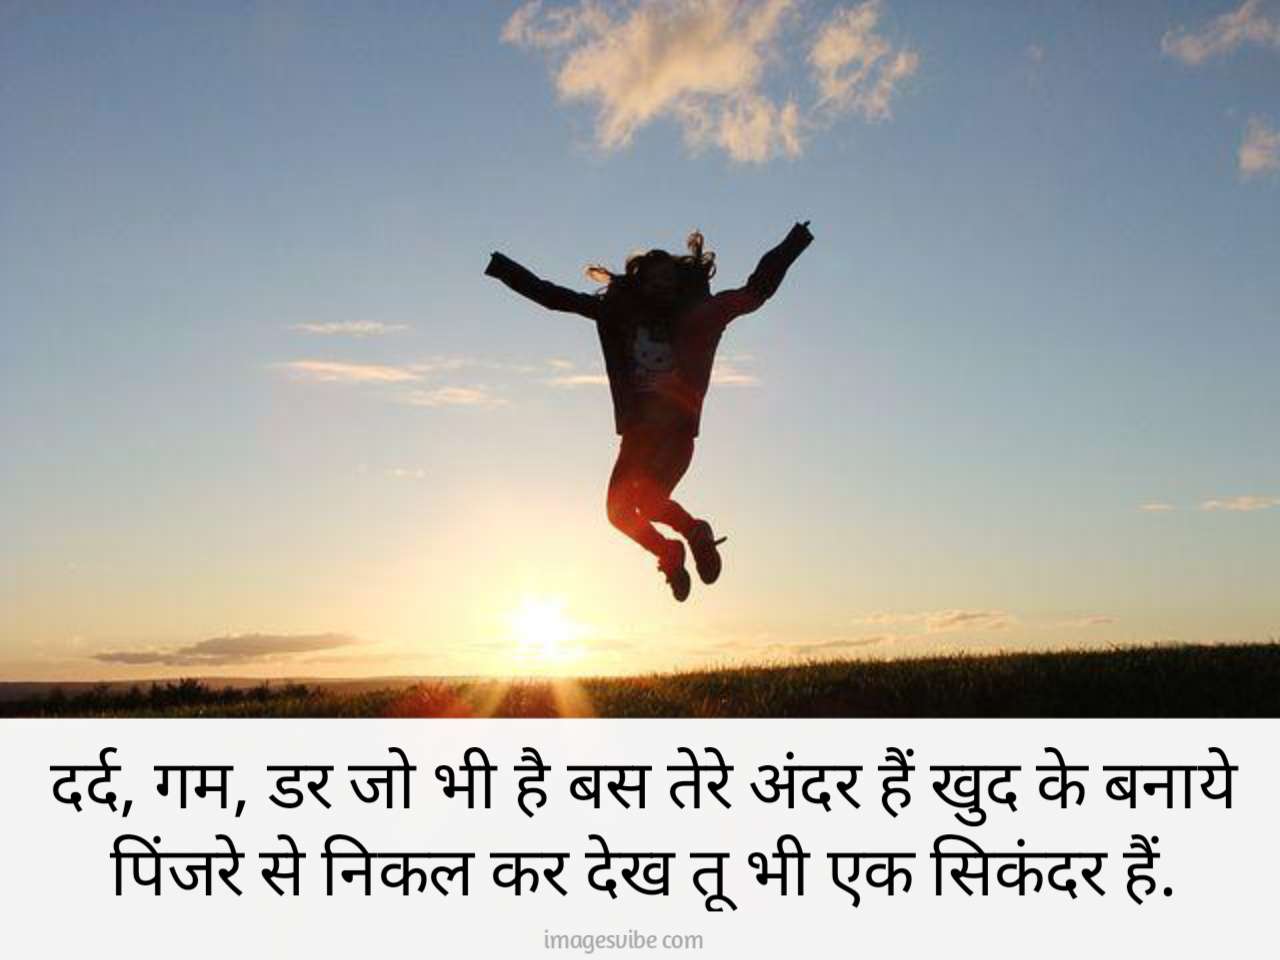 Motivational Hindi Images With Quotes10 